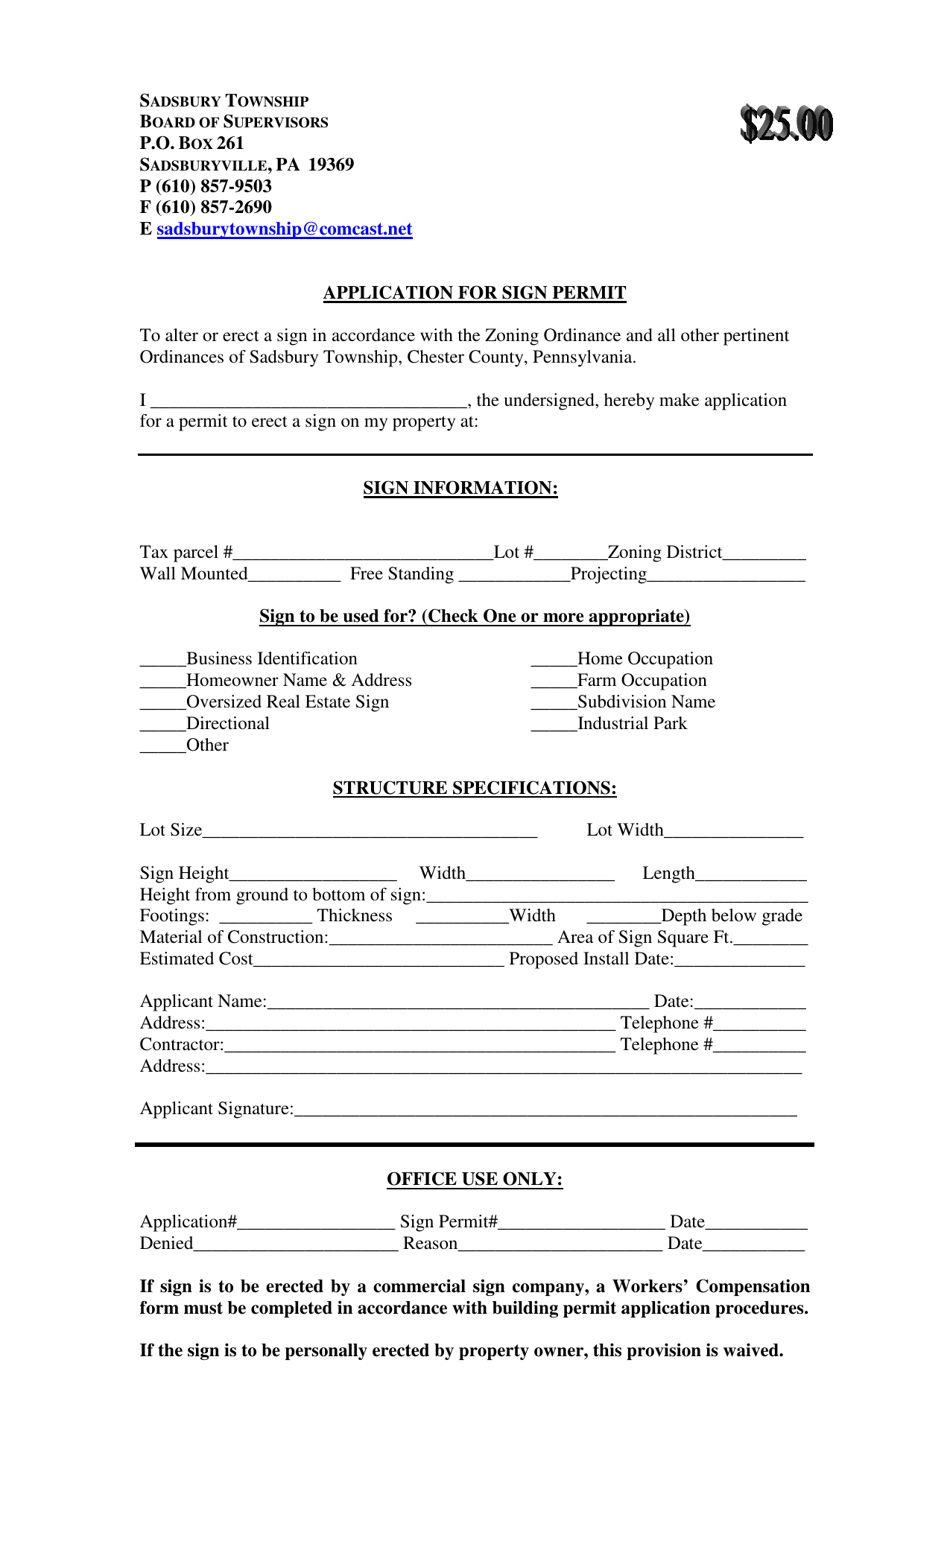 Application for Sign Permit - Sadsbury Township, Pennsylvania, Page 1